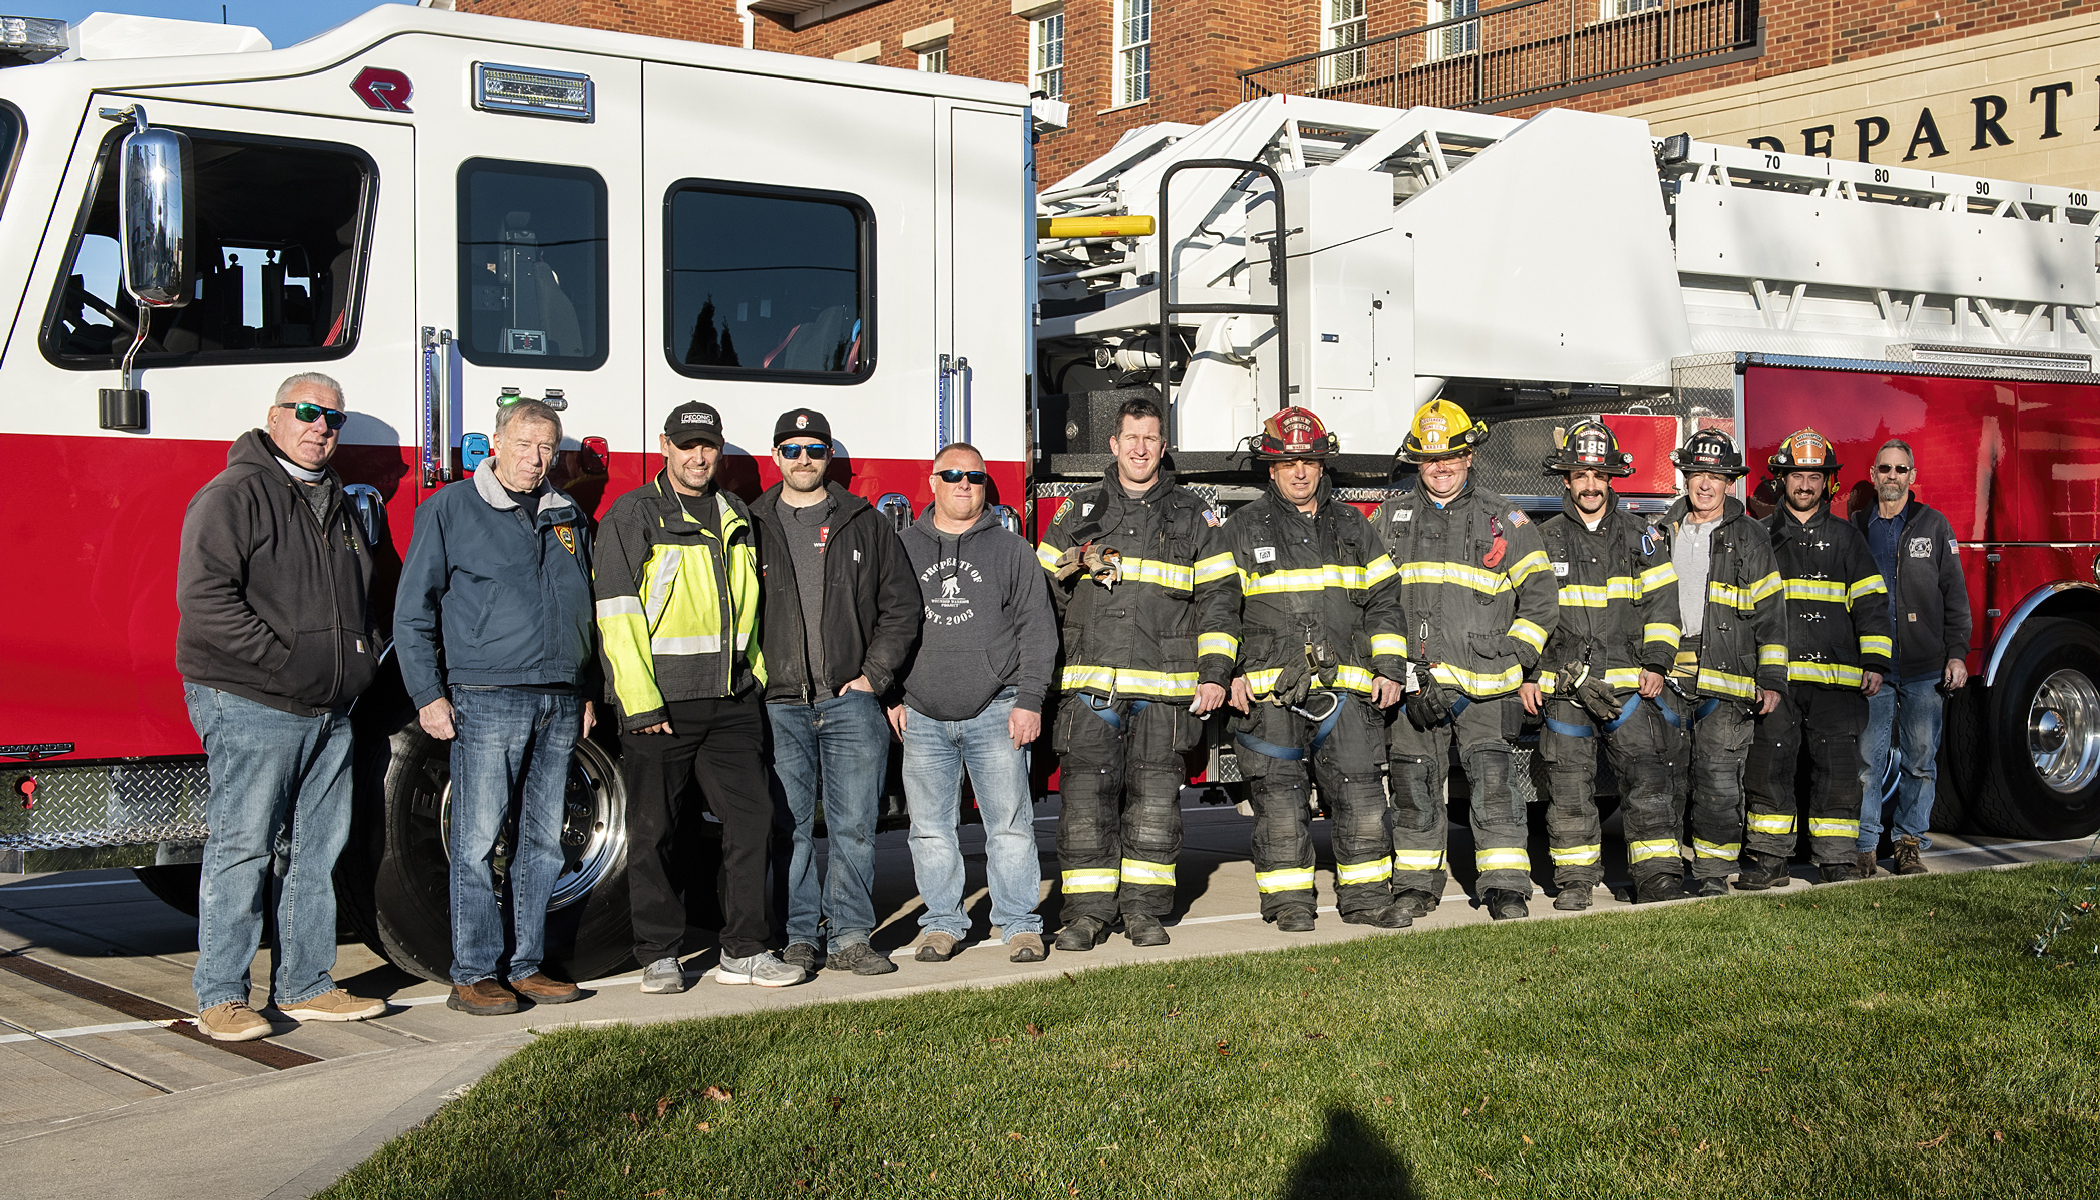 Brian Durr and Anthony Granito of Gabrielli Truck Sales, from the left, delivered the Westhampton Beach Fire Department’s new Rosenbauer tower ladder on Monday, December 20. A number of firefighters were on hand to welcome the new addition to the department as was the department’s mechanic, Mark Northrup, far left. The new apparatus will be put into service as soon as lettering and logos can be applied and the members can be trained on it. COURTESY WESTHAMPTON BEACH FIRE DEPARTMENT